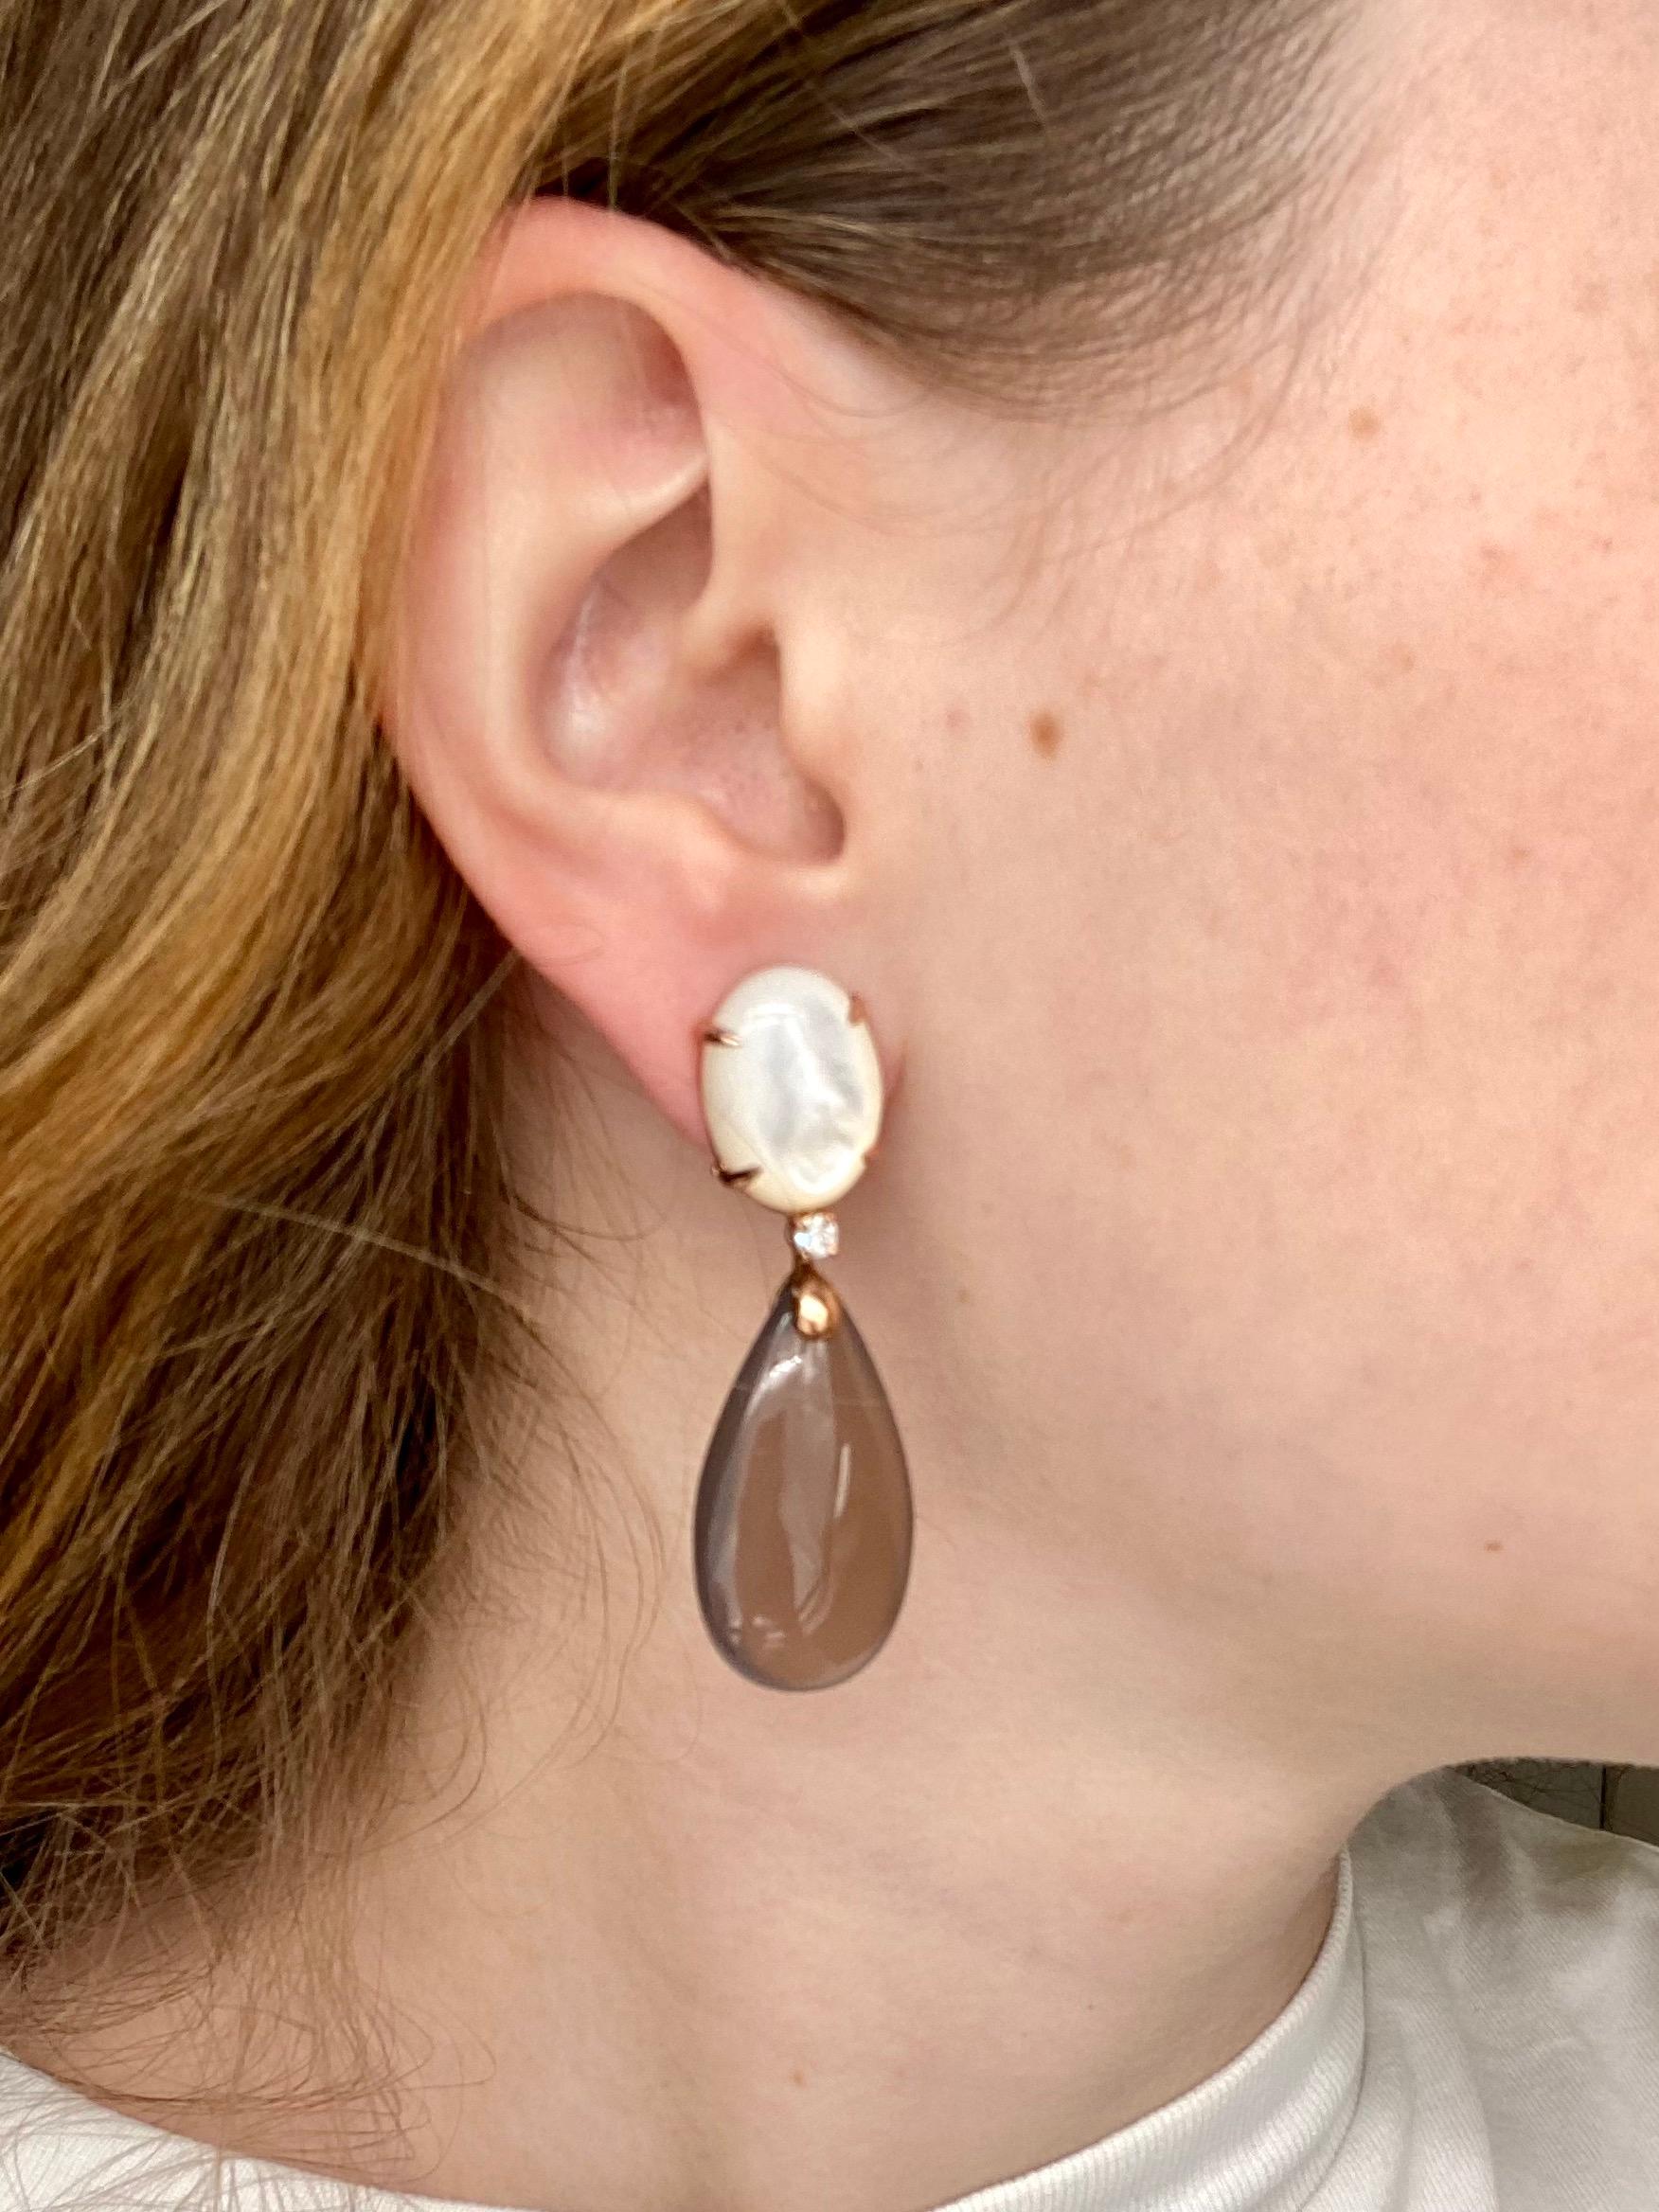 Women's Earrings in Pink Gold with Mother-of-Pearl, Diamonds 0.14 Carat and Gray Agate For Sale